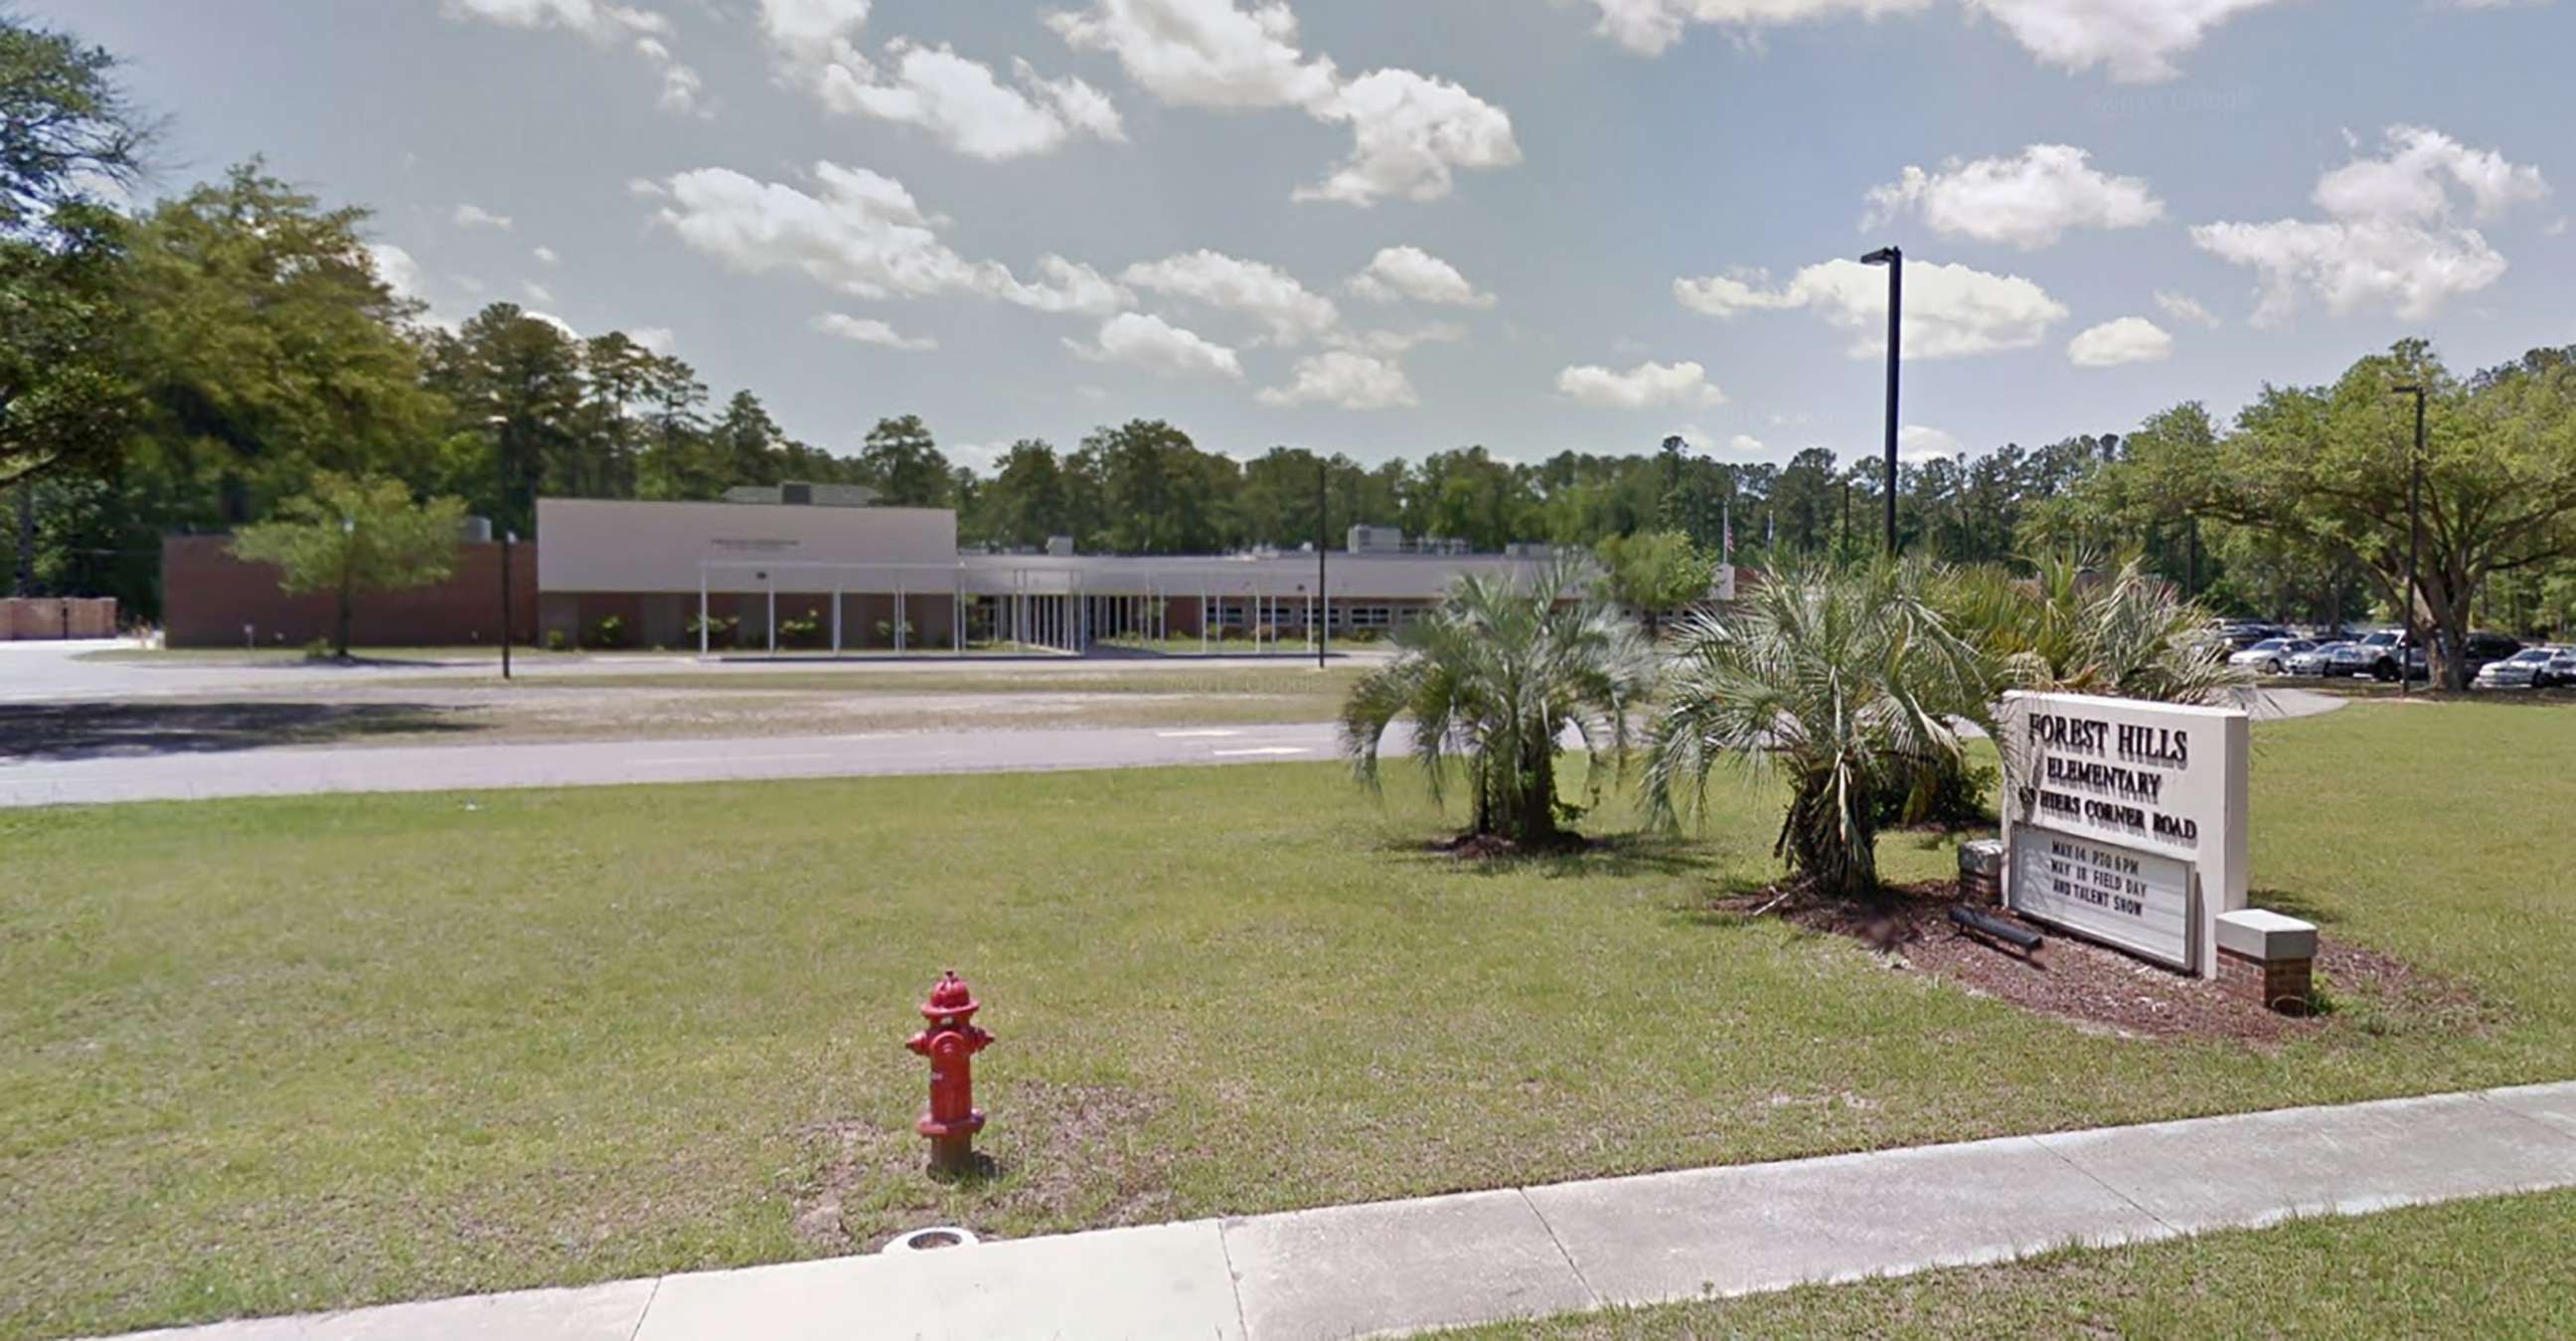 PHOTO: Forest Hills Elementary school is pictured in this undated image from Google.